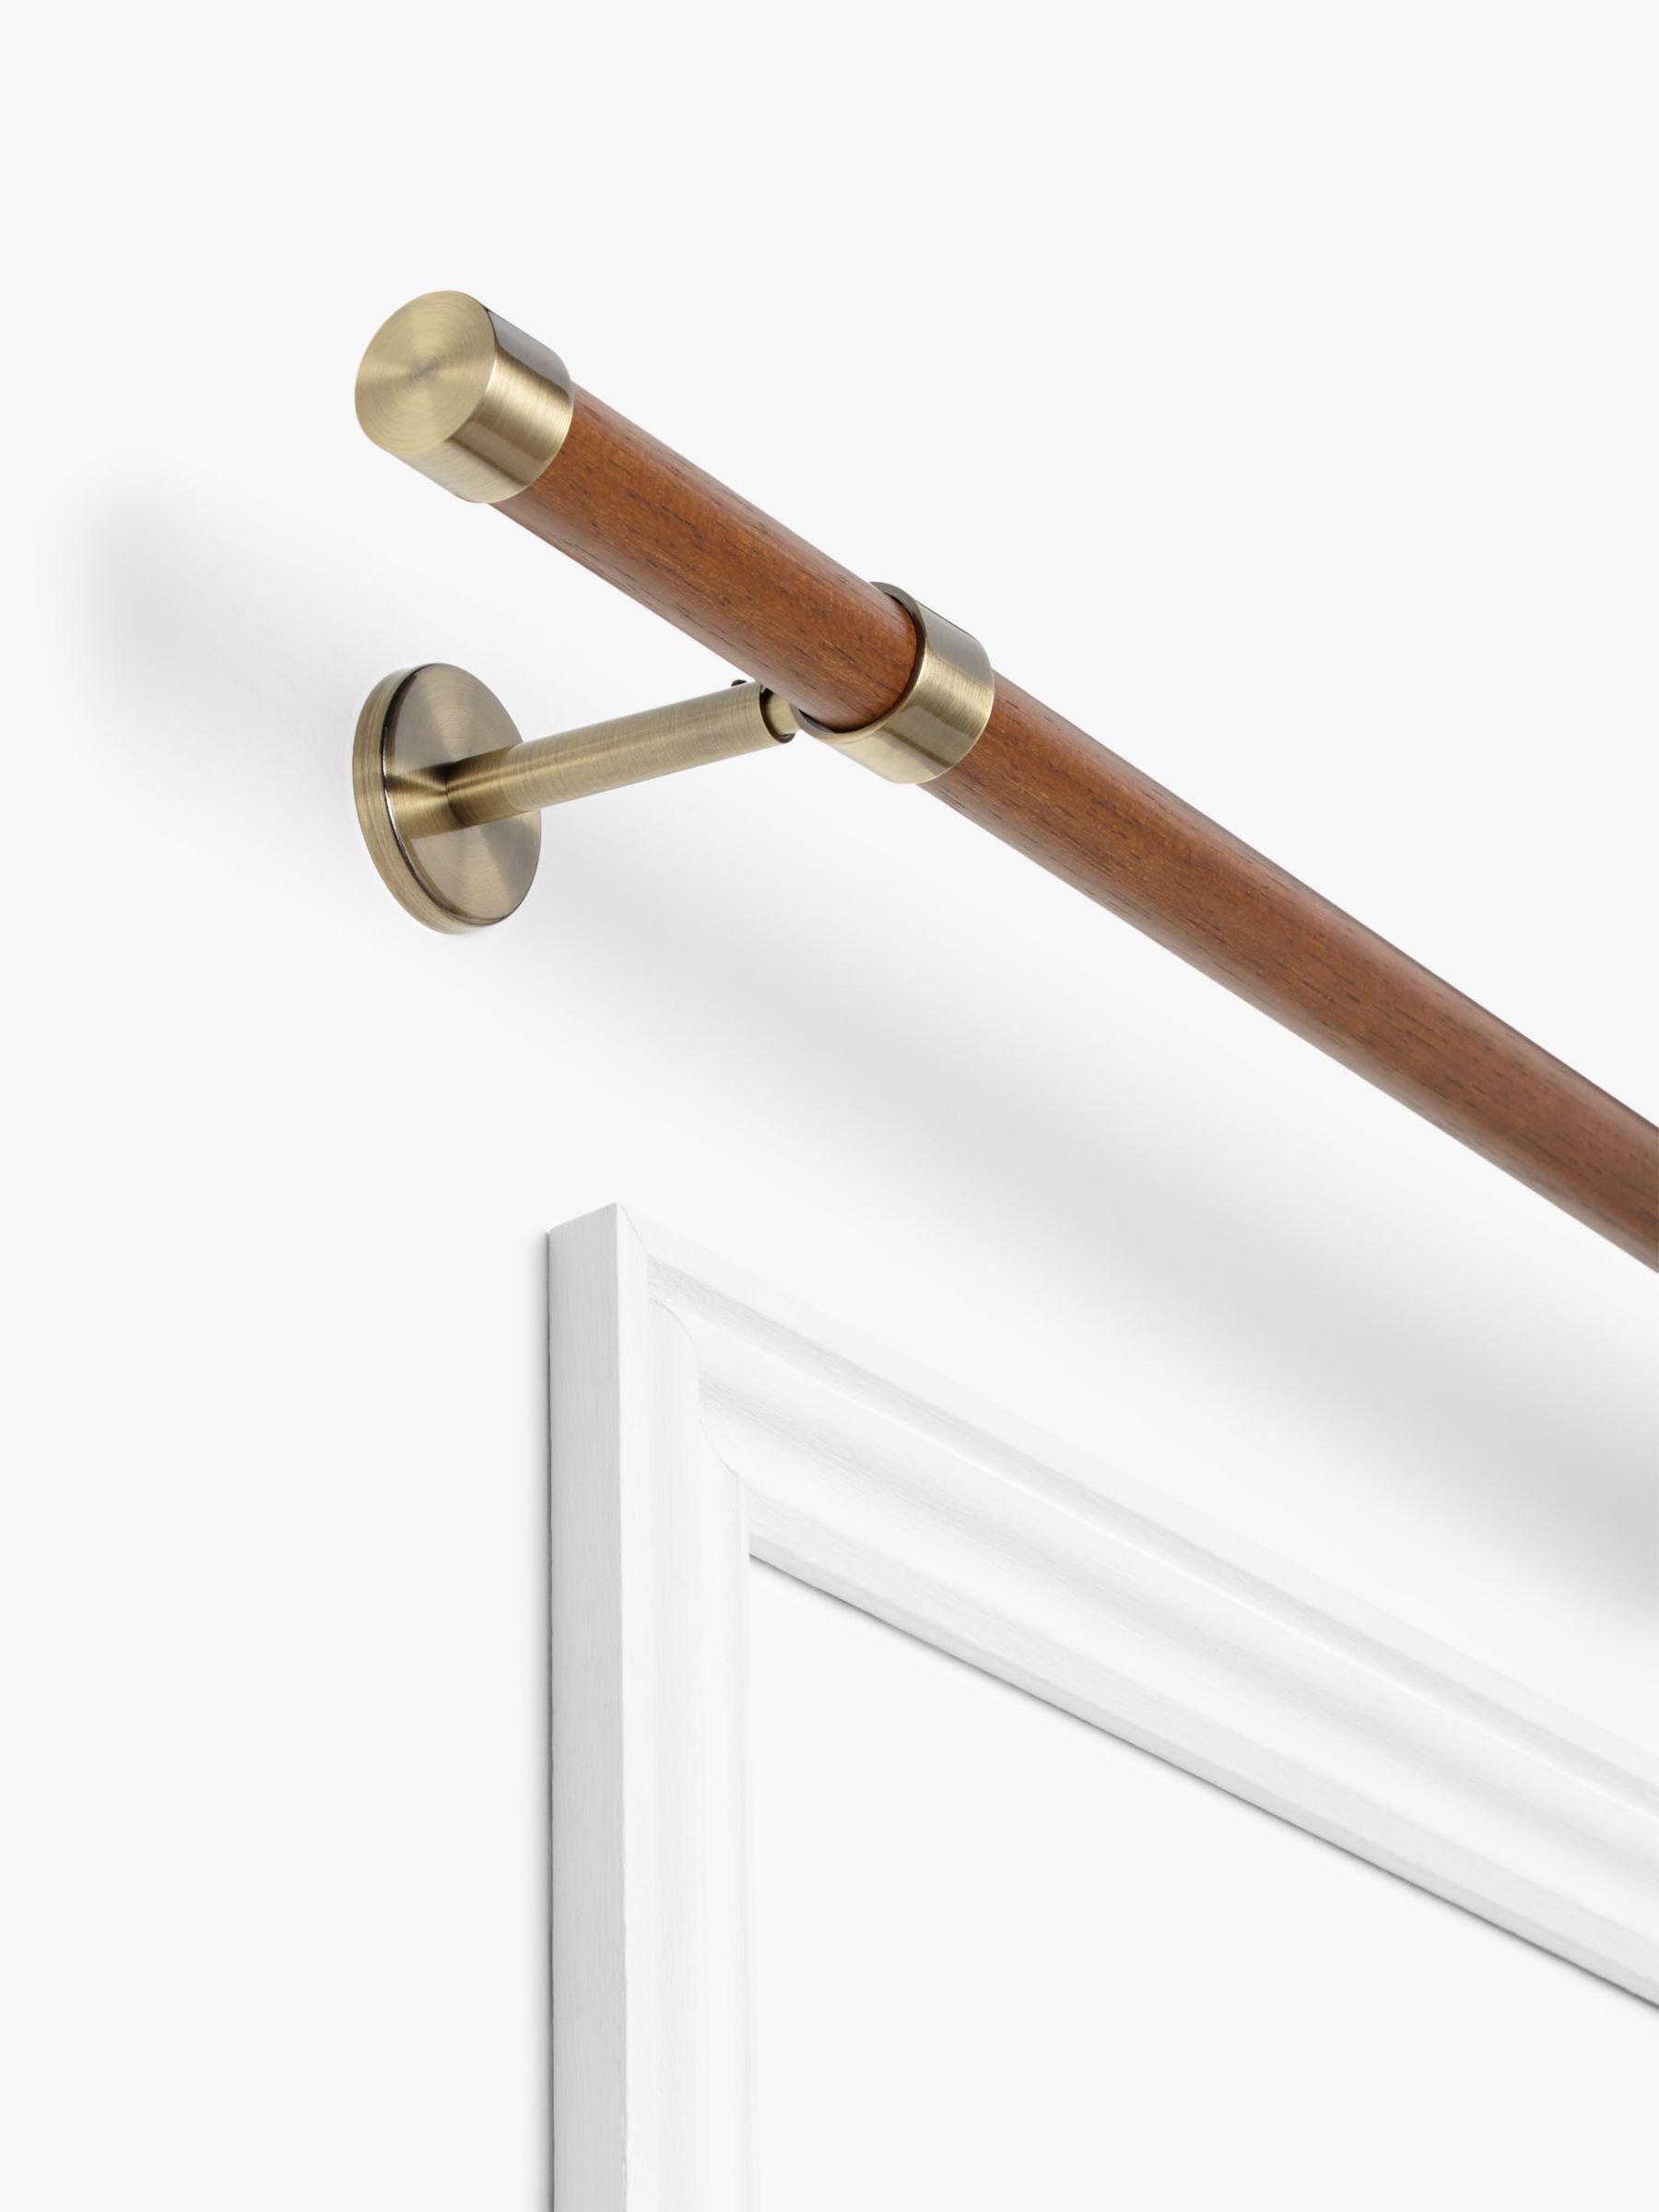 Amazing and beautiful wooden curtain
  poles